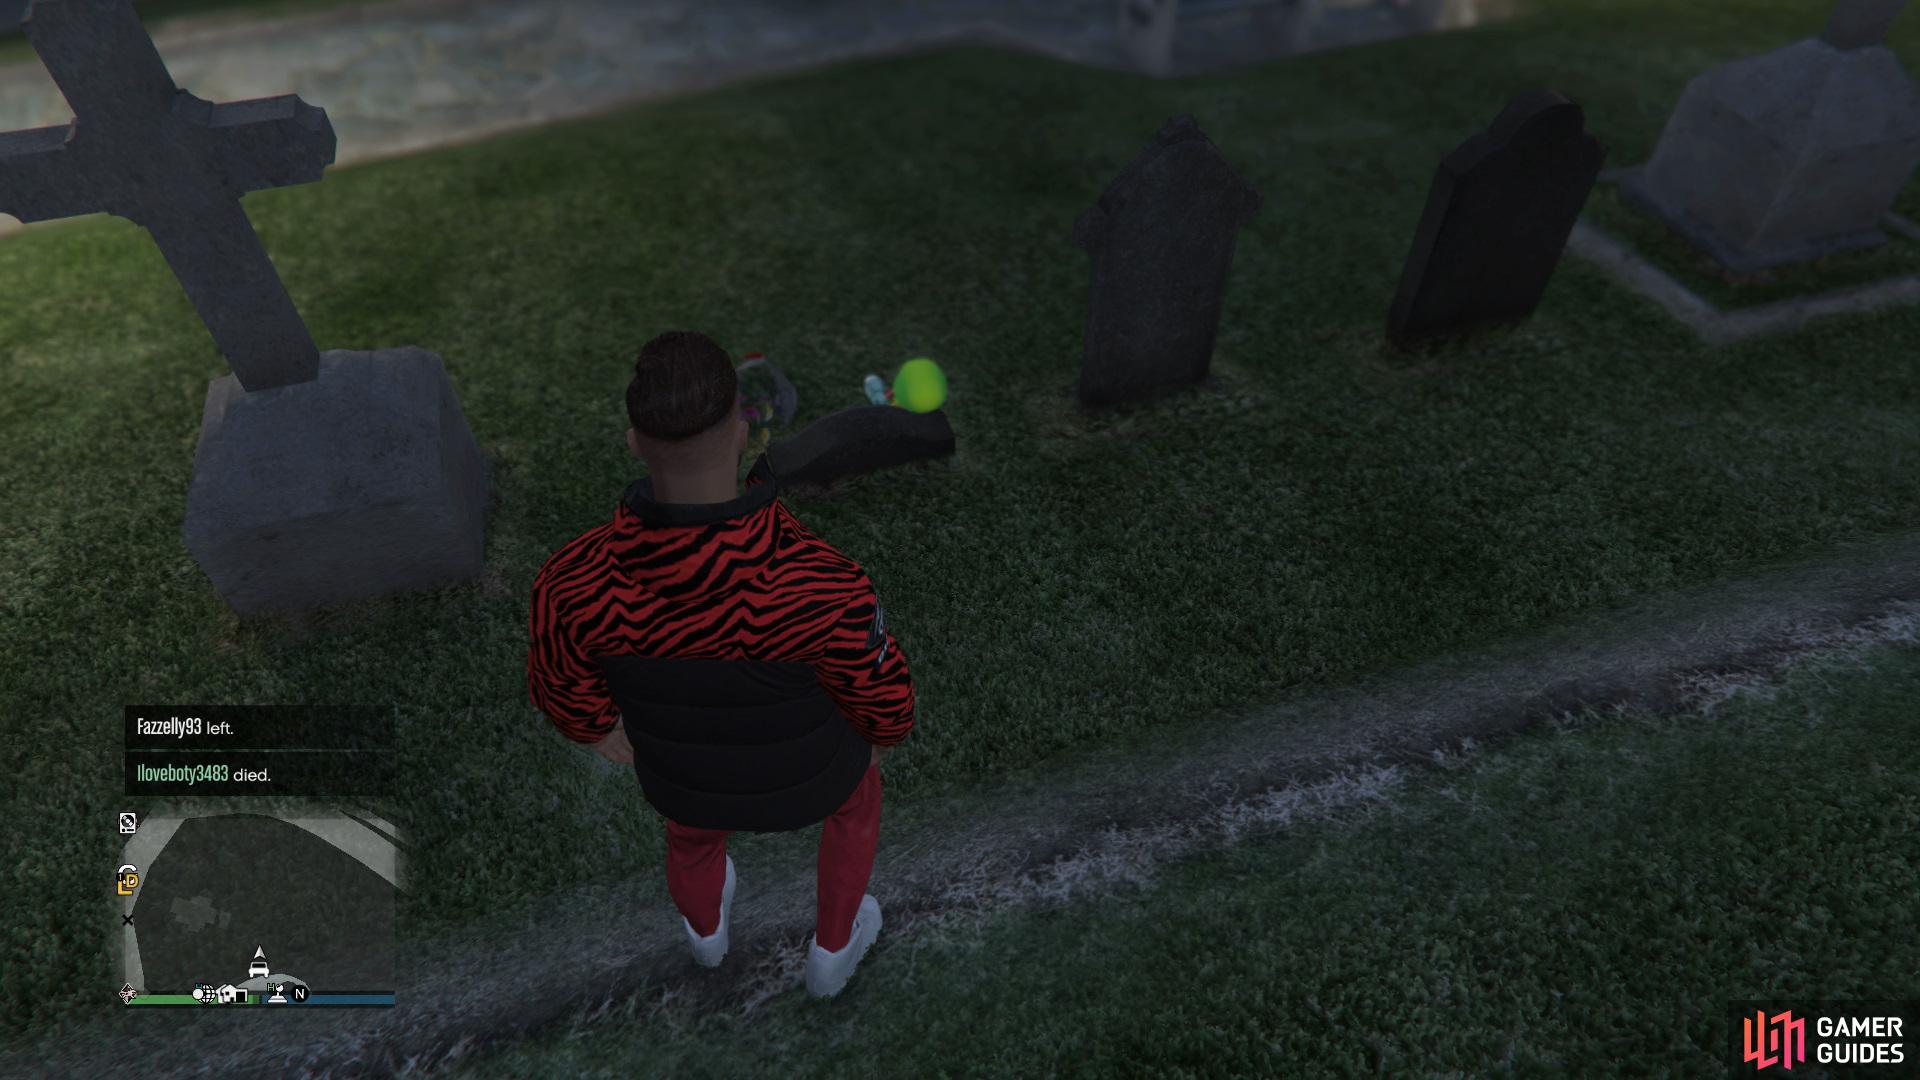 to find the action figure sitting on a grave.